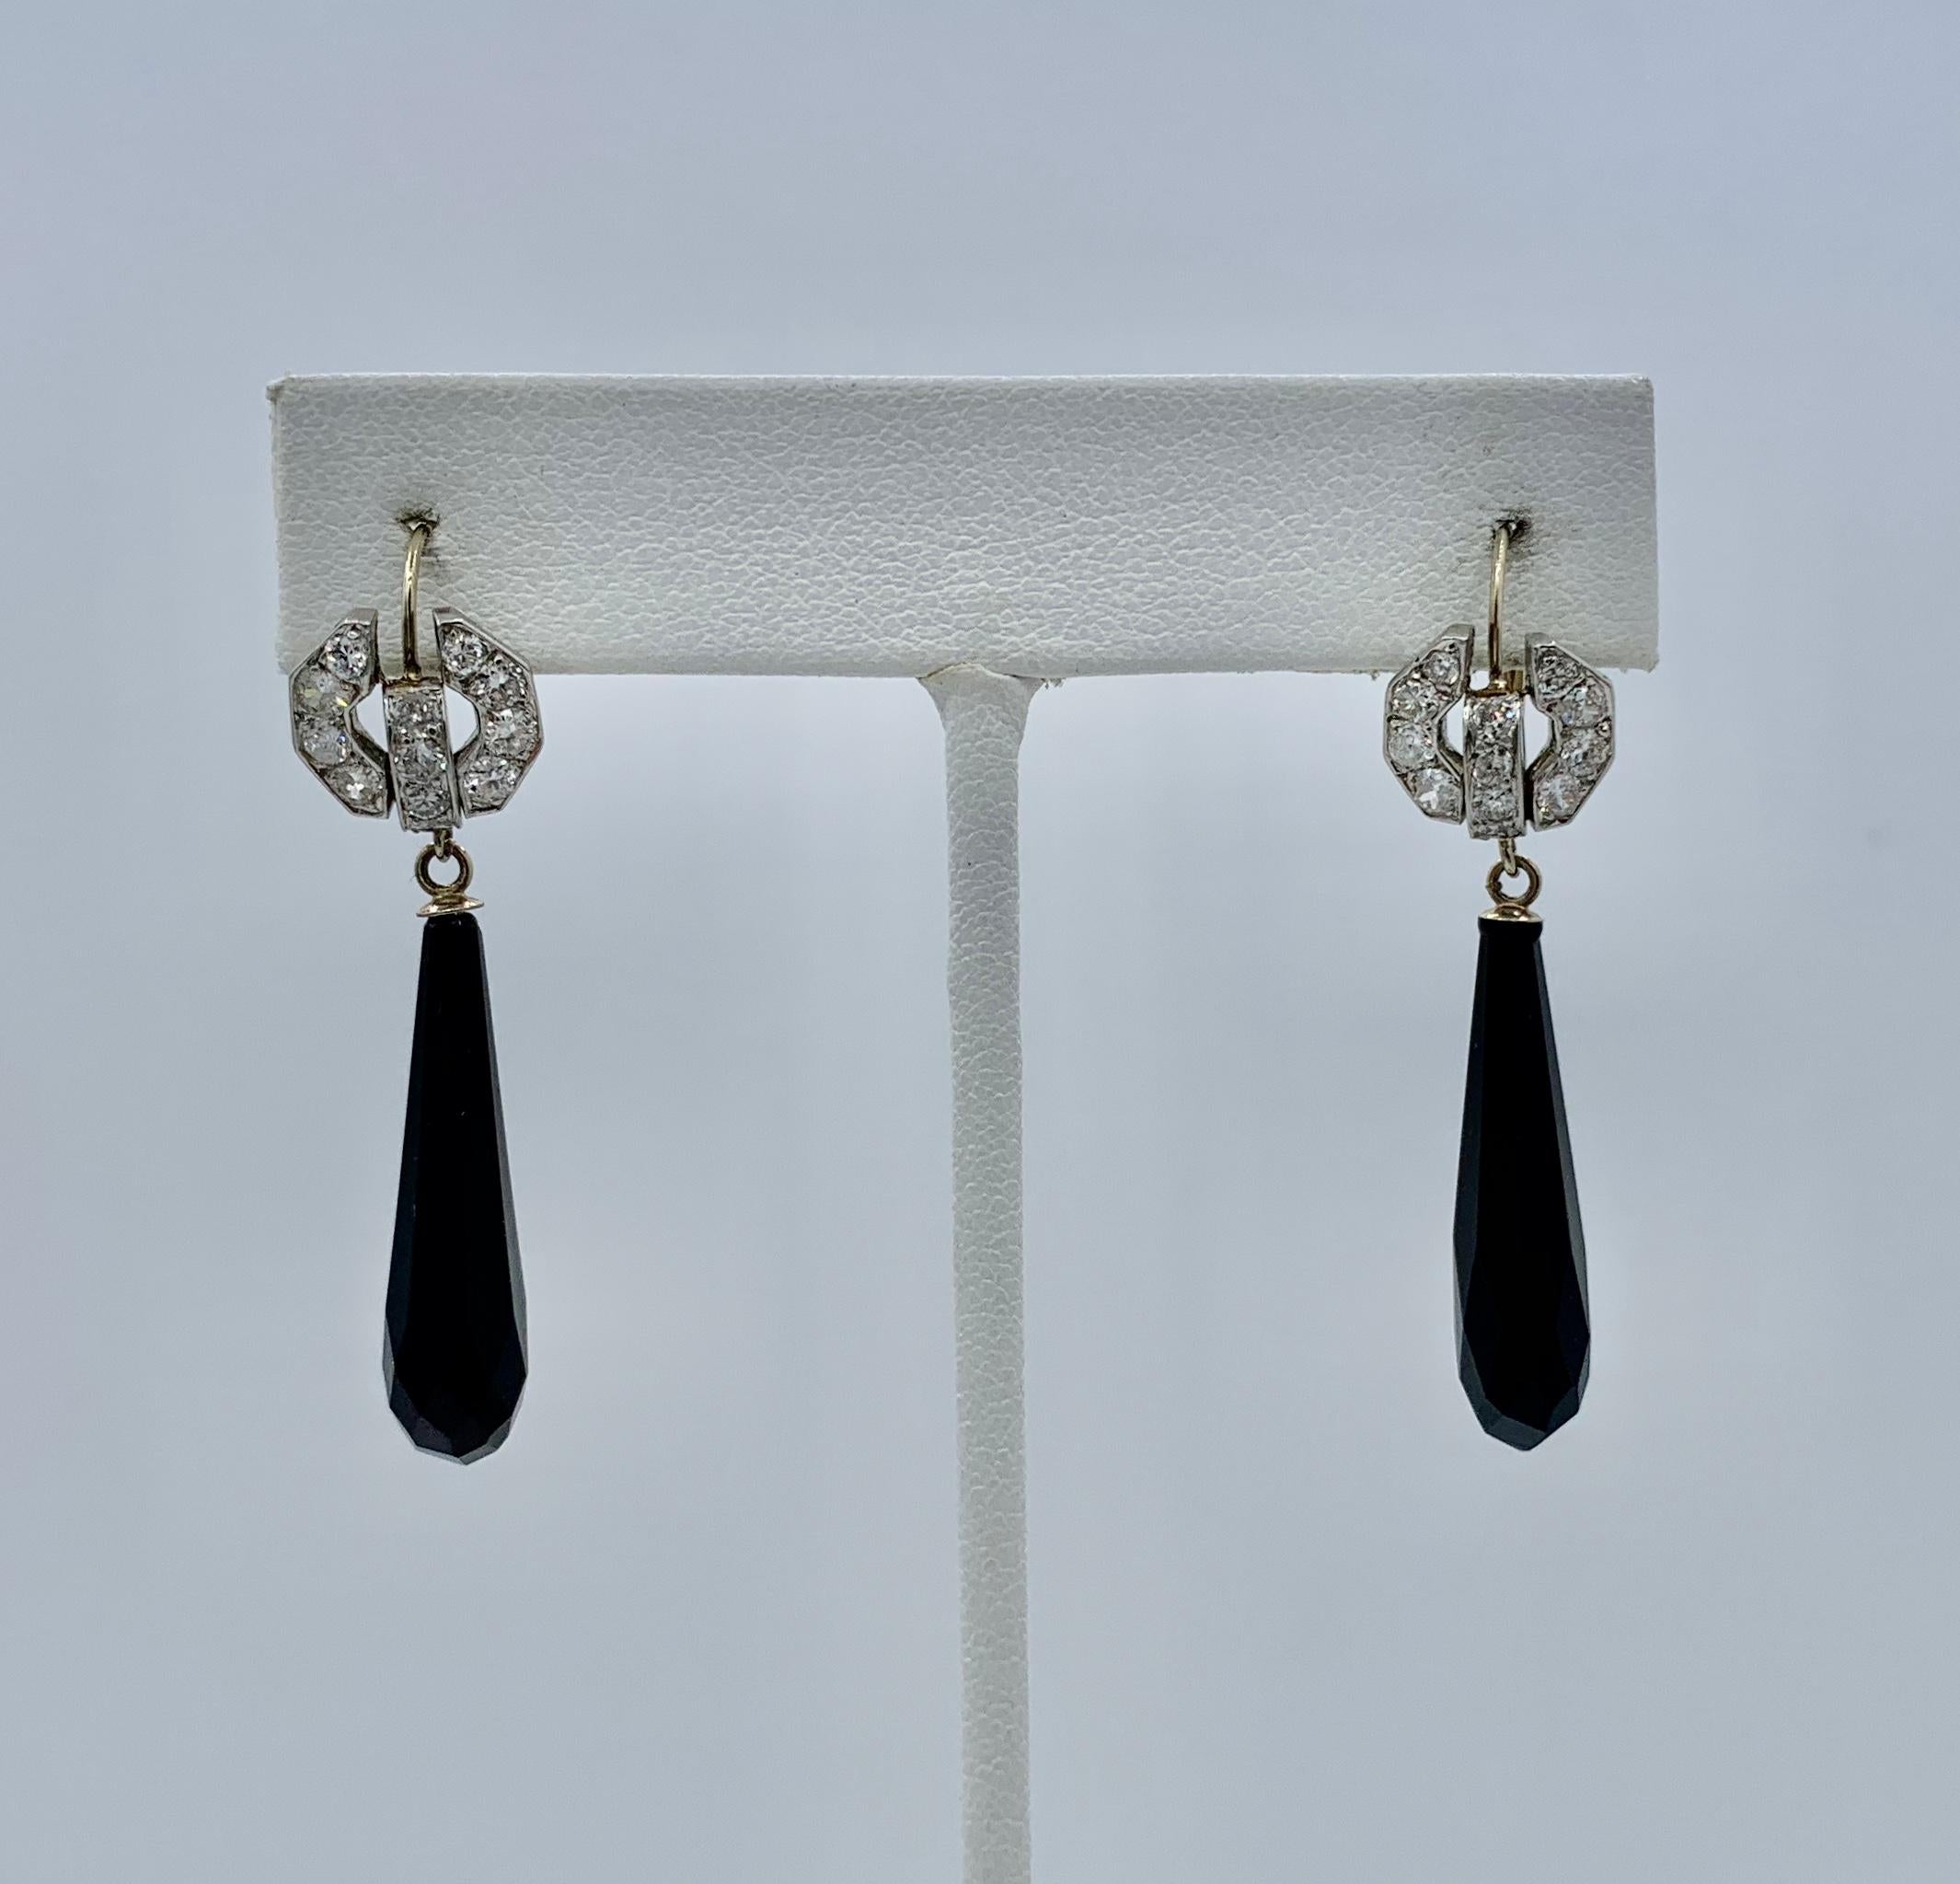 Diamond and Black Onyx Platinum and 14 Karat White Gold Dangle Earrings
These beautiful dangle drop earrings combine 1.2 Carats of stunning white diamonds with faceted black onyx drops in a dramatic design in Platinum atop 14 Karat White Gold.  The